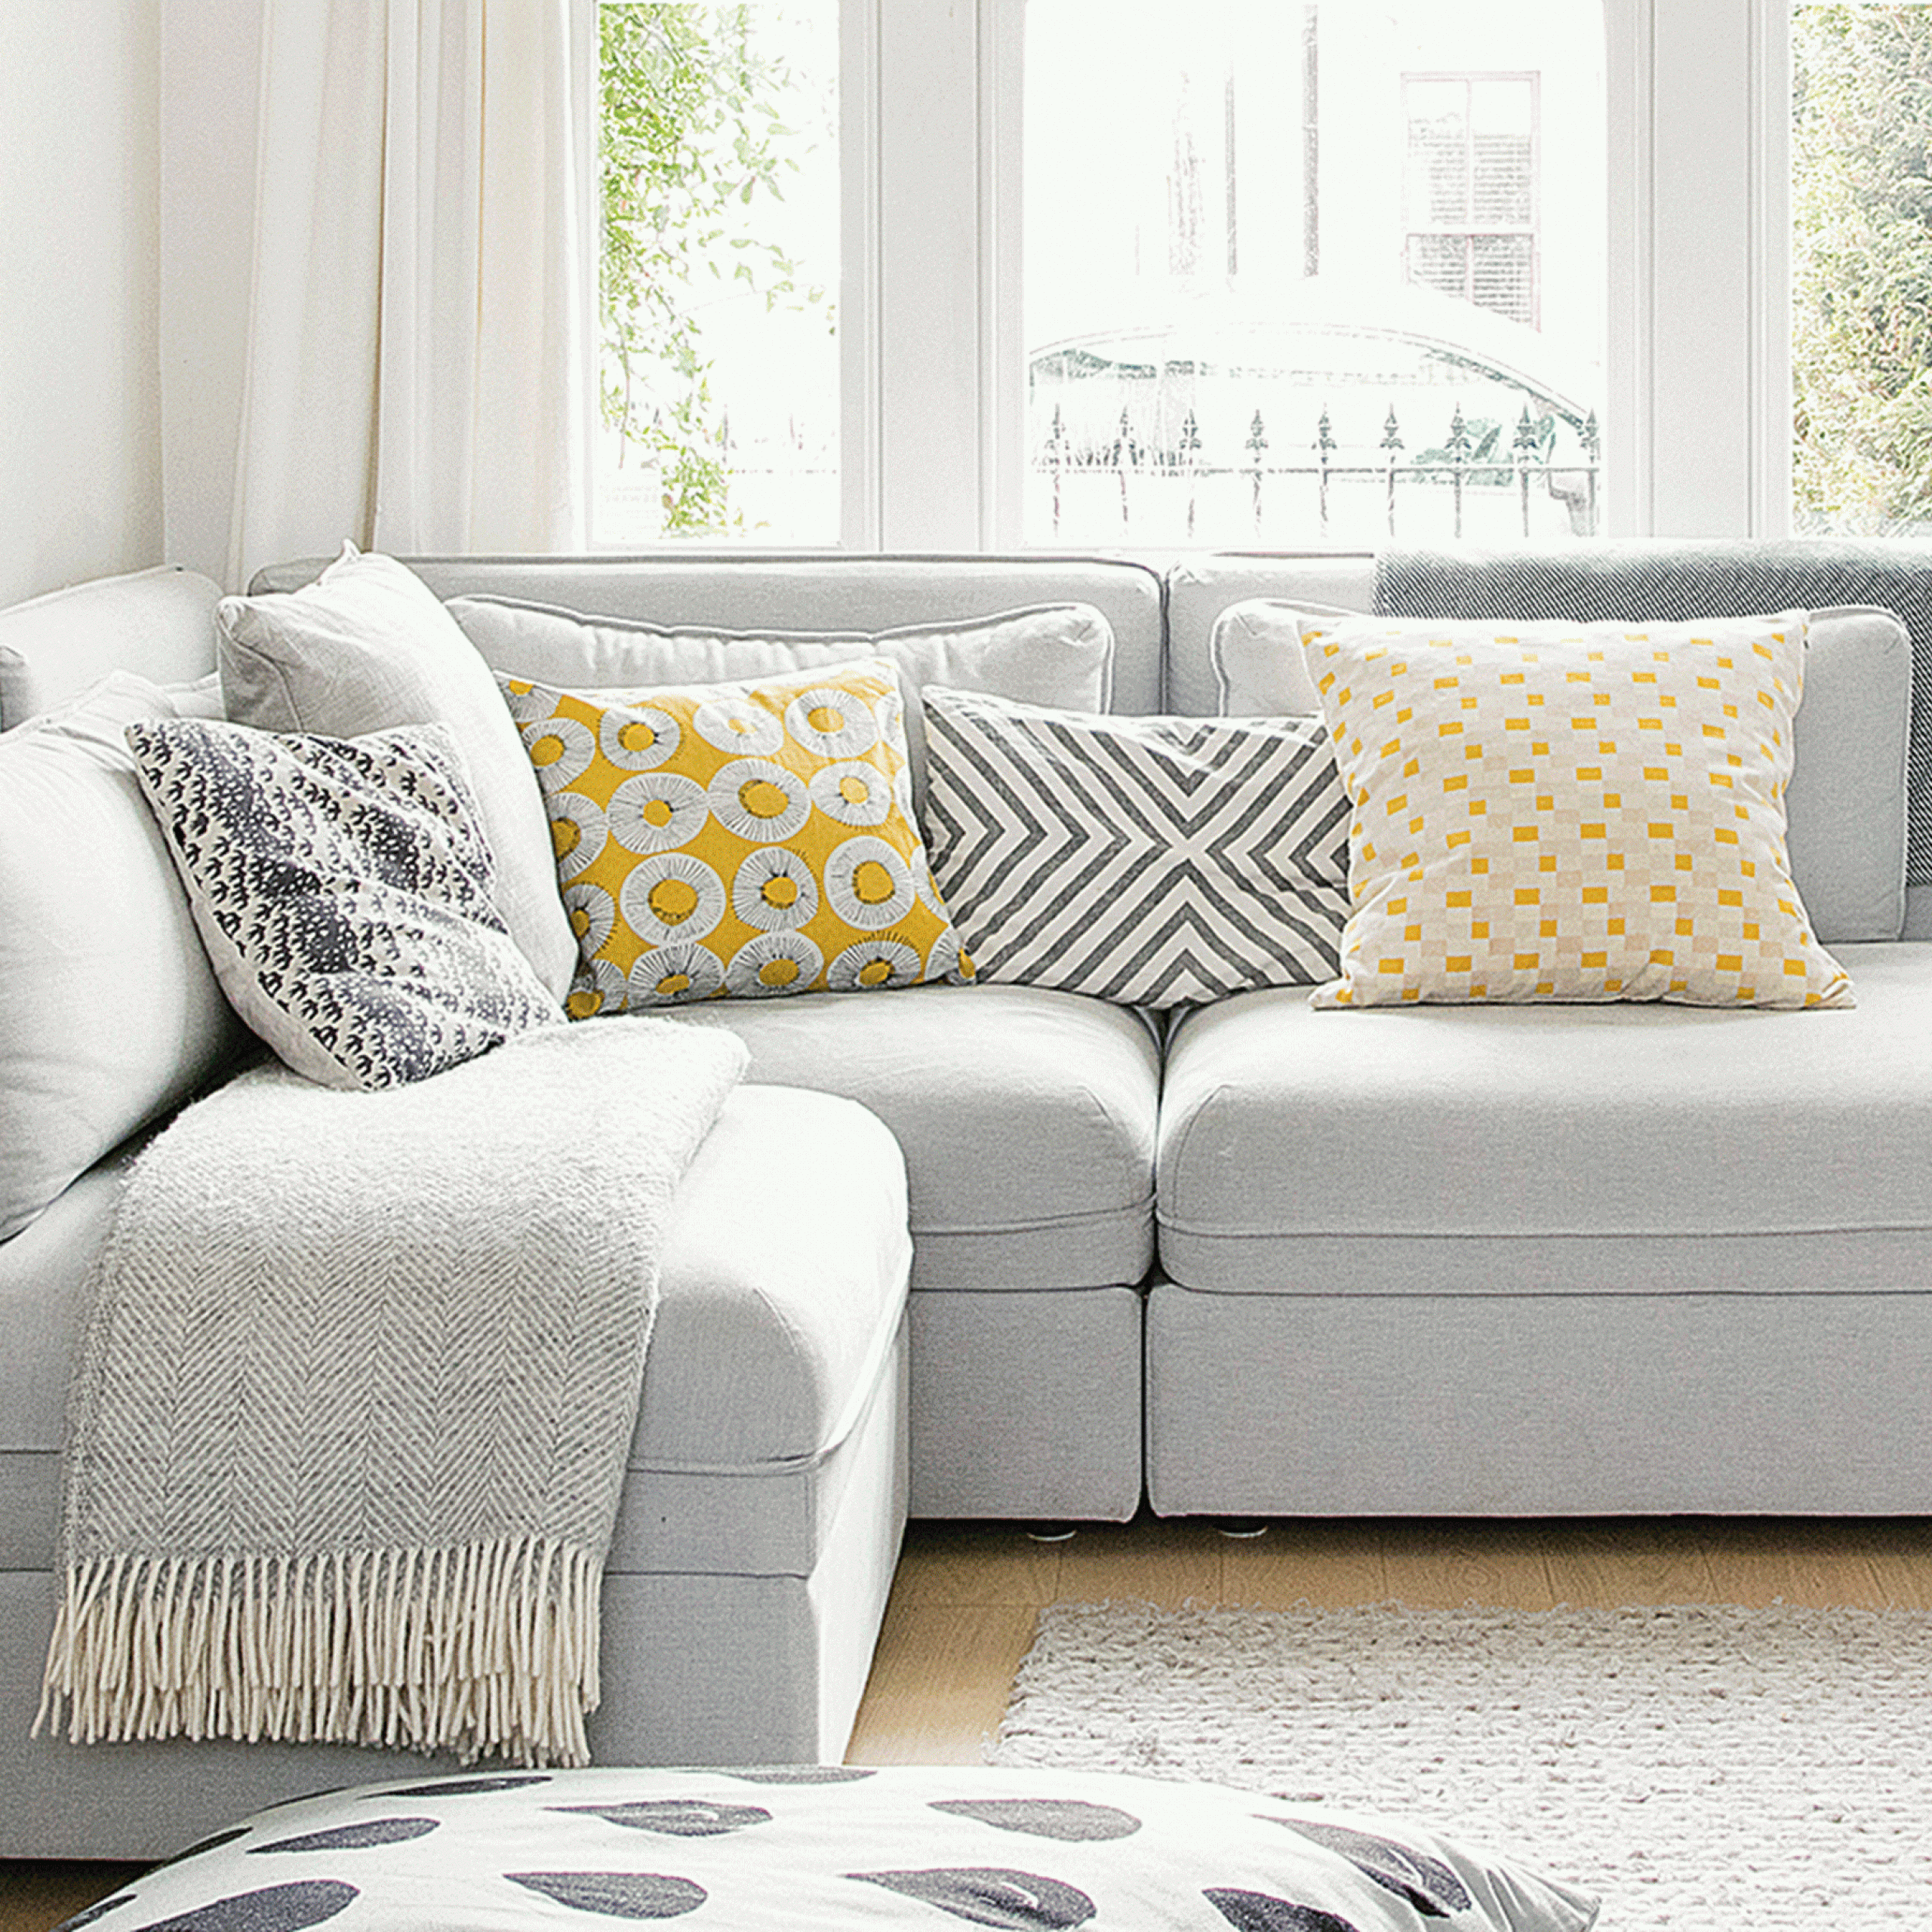 16 Sofa Ideas For Small Living Rooms: Looks, Styles And Tips | Ideal Home Throughout Sofas For Small Spaces (View 5 of 15)